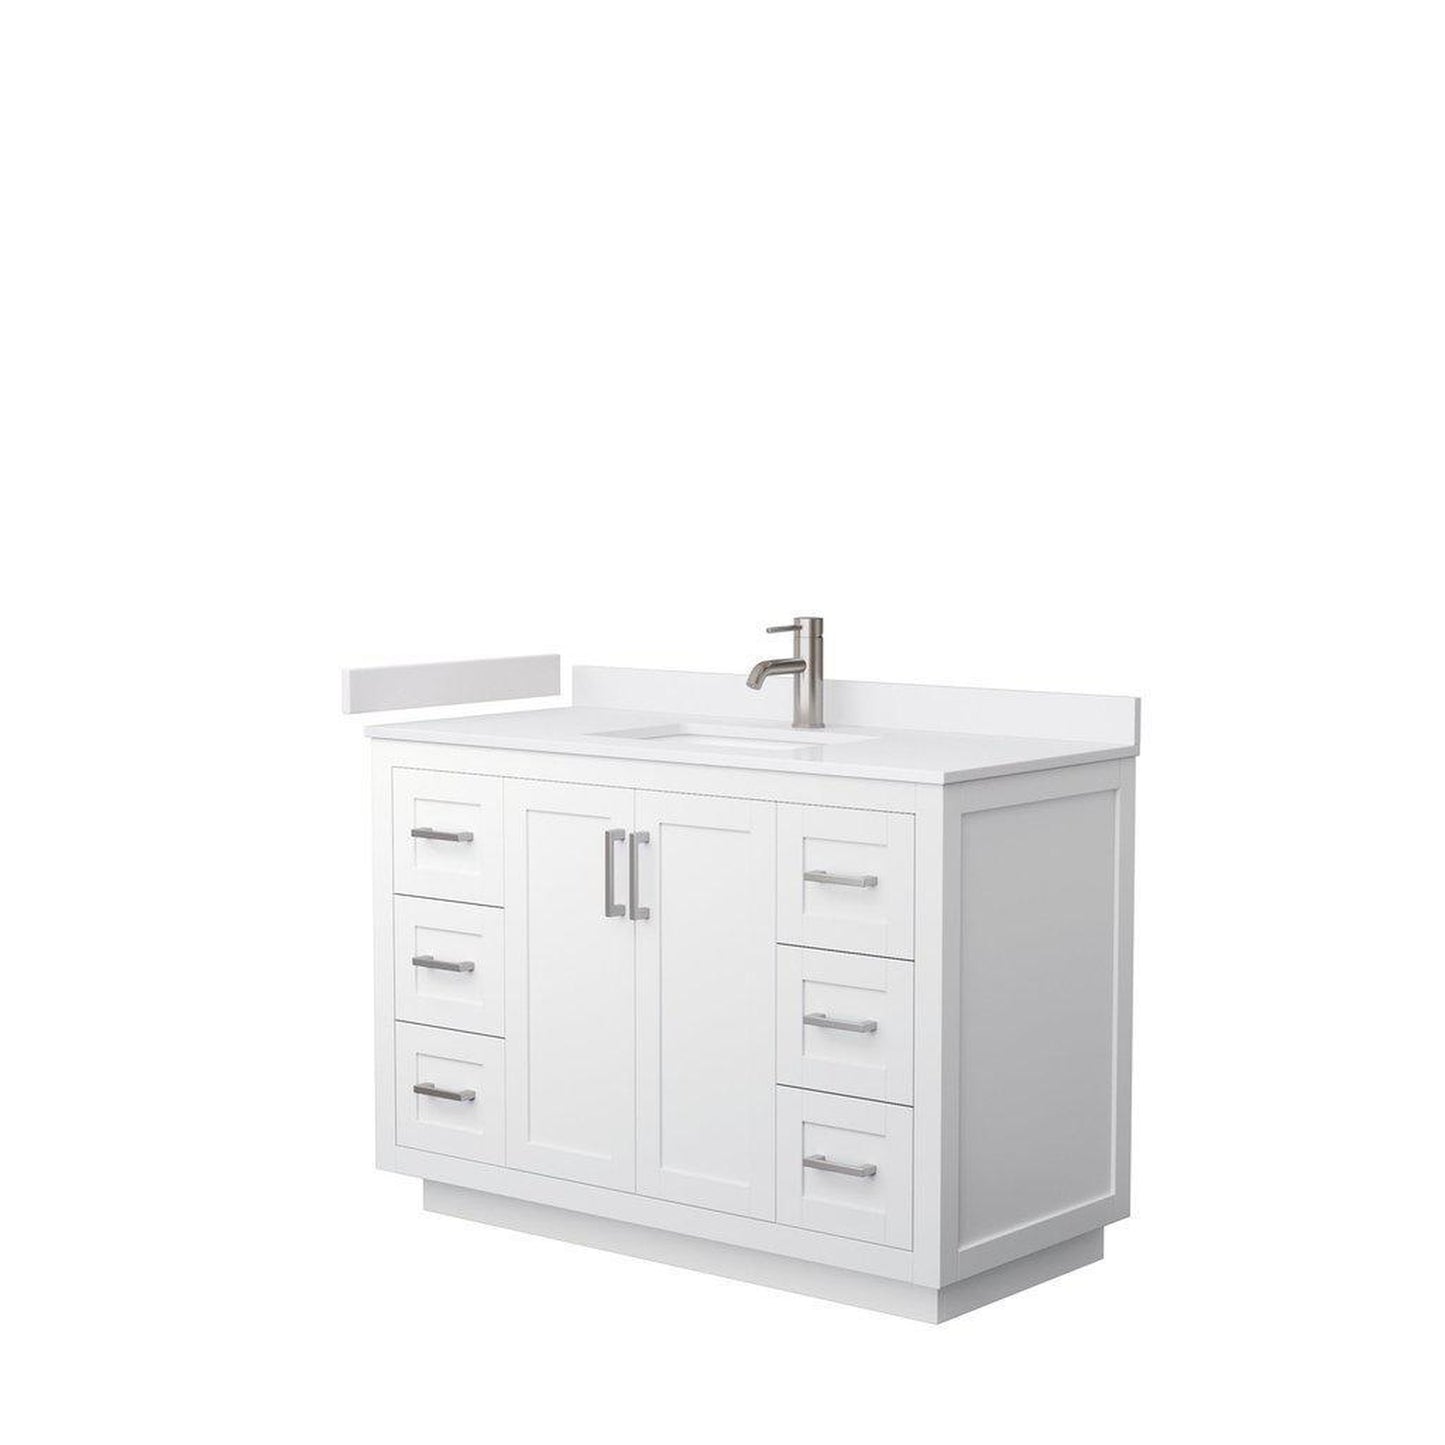 Wyndham Collection Miranda 48" Single Bathroom White Vanity Set With White Cultured Marble Countertop, Undermount Square Sink, And Brushed Nickel Trim